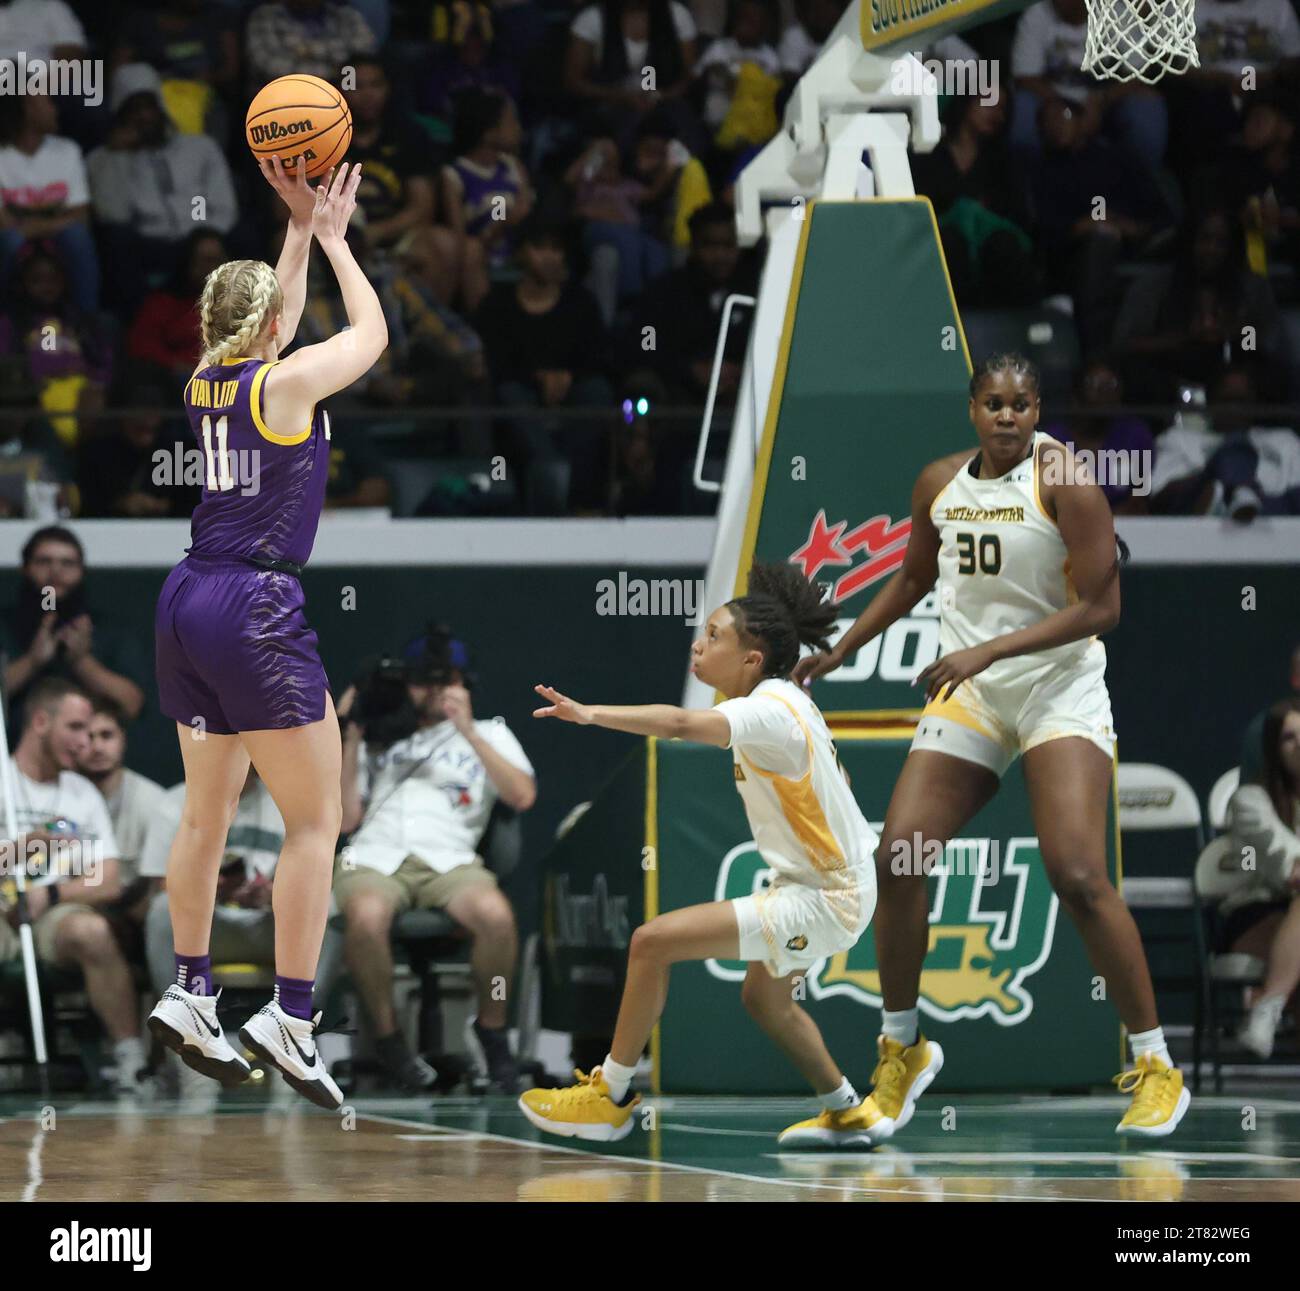 Hammond, USA. 17th Nov, 2023. LSU Lady Tigers guard Hailey Van Lith (11) shoots a jumper during a women's college basketball game at the University Center in Hammond, Louisiana on Friday, November 17, 2023. (Photo by Peter G. Forest/Sipa USA) Credit: Sipa USA/Alamy Live News Stock Photo